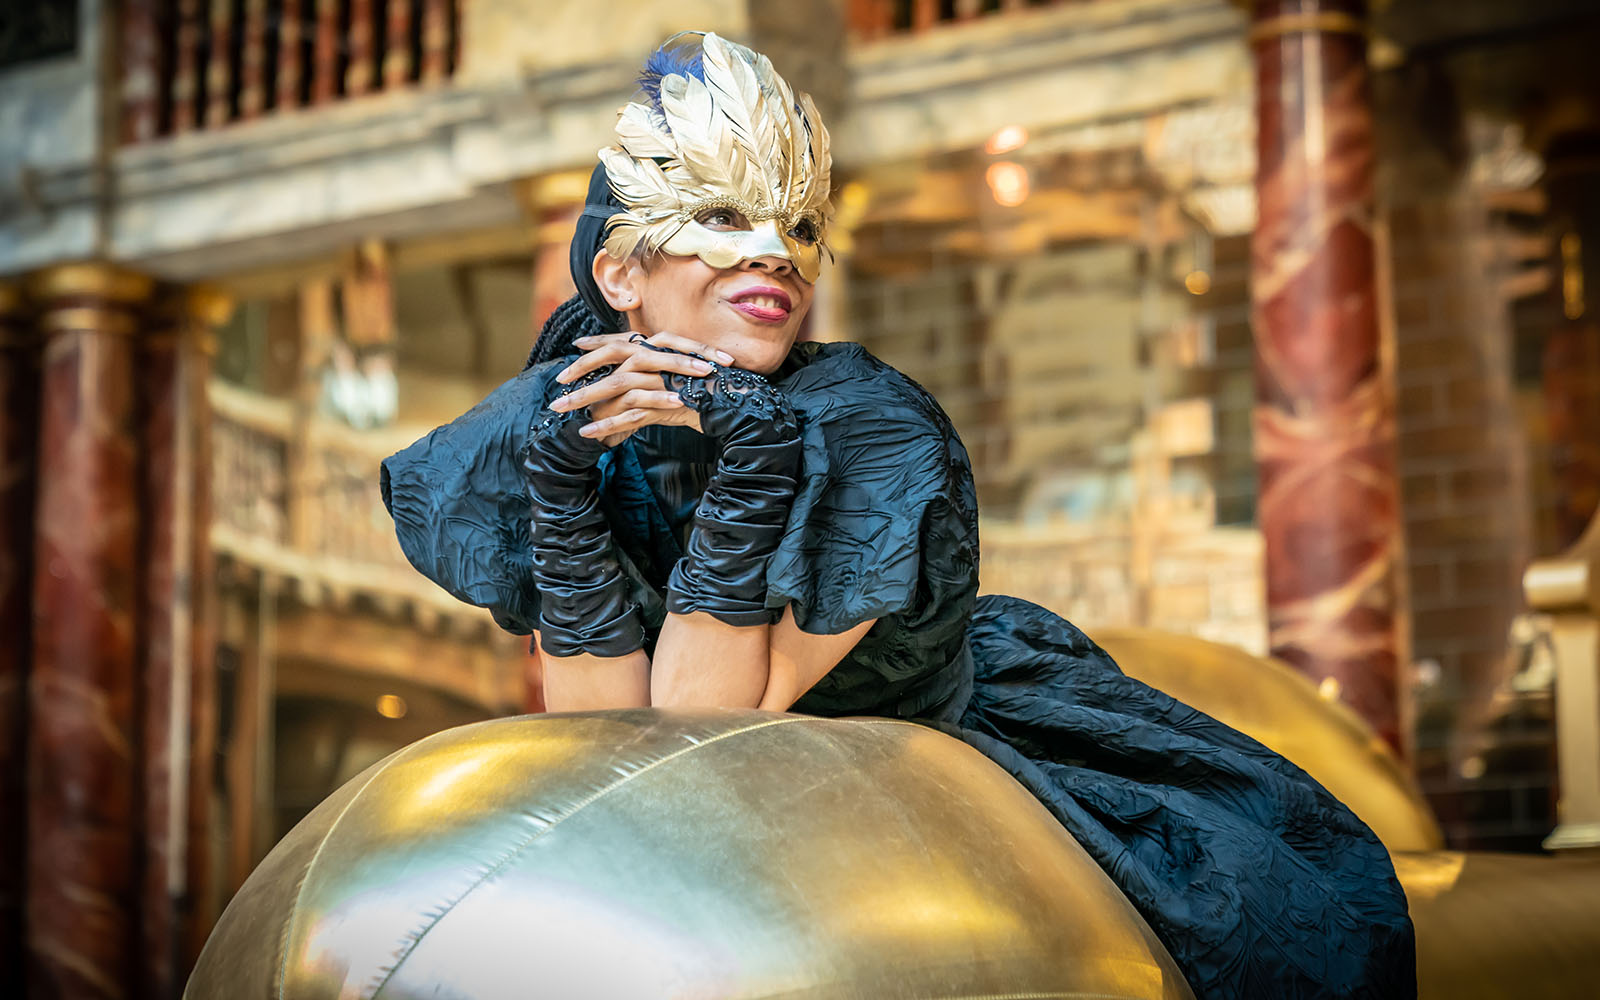 An actor wearing black corset dress, and golden feathered eye mask leans on a golden inflatable, smiling.